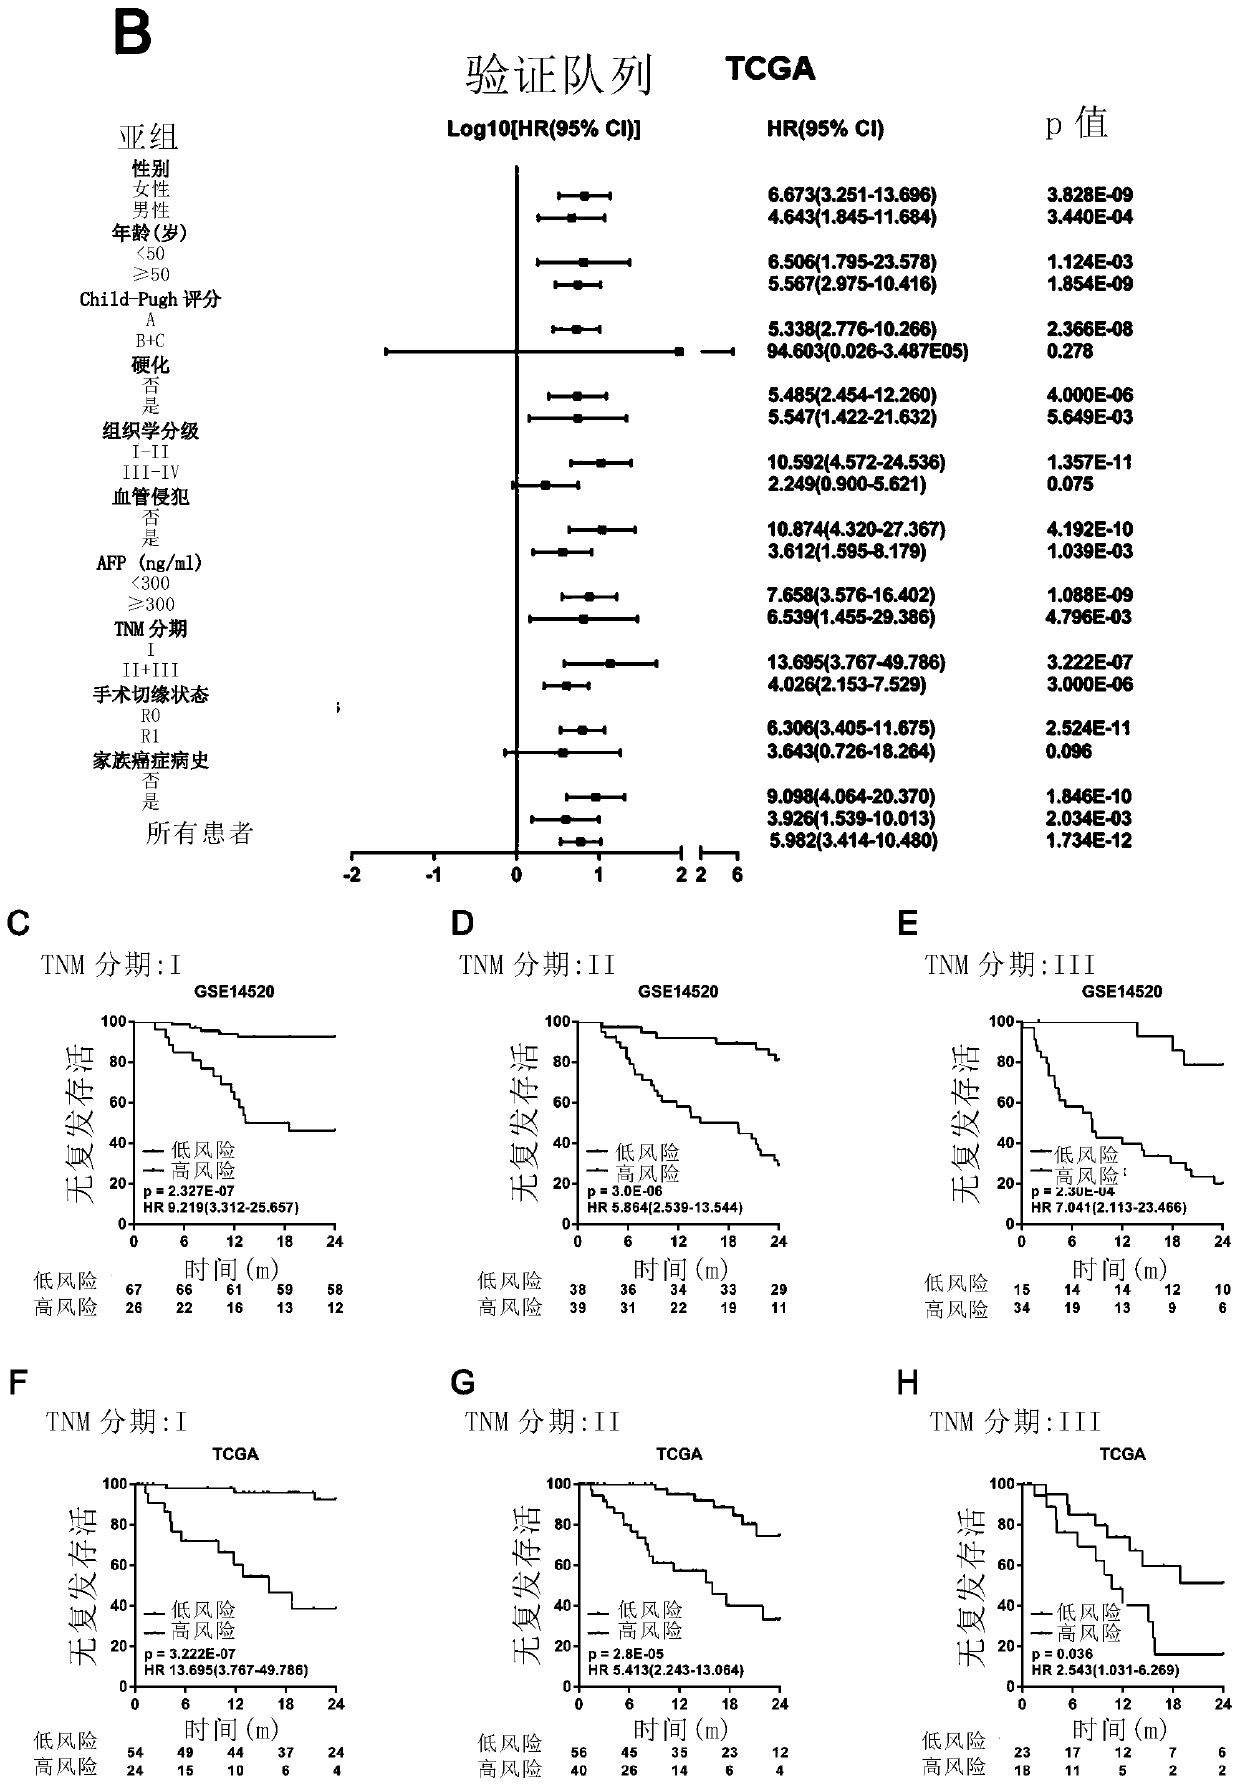 Construction and application evaluation of molecular model for predicting postoperative early recurrence risk of liver cancer